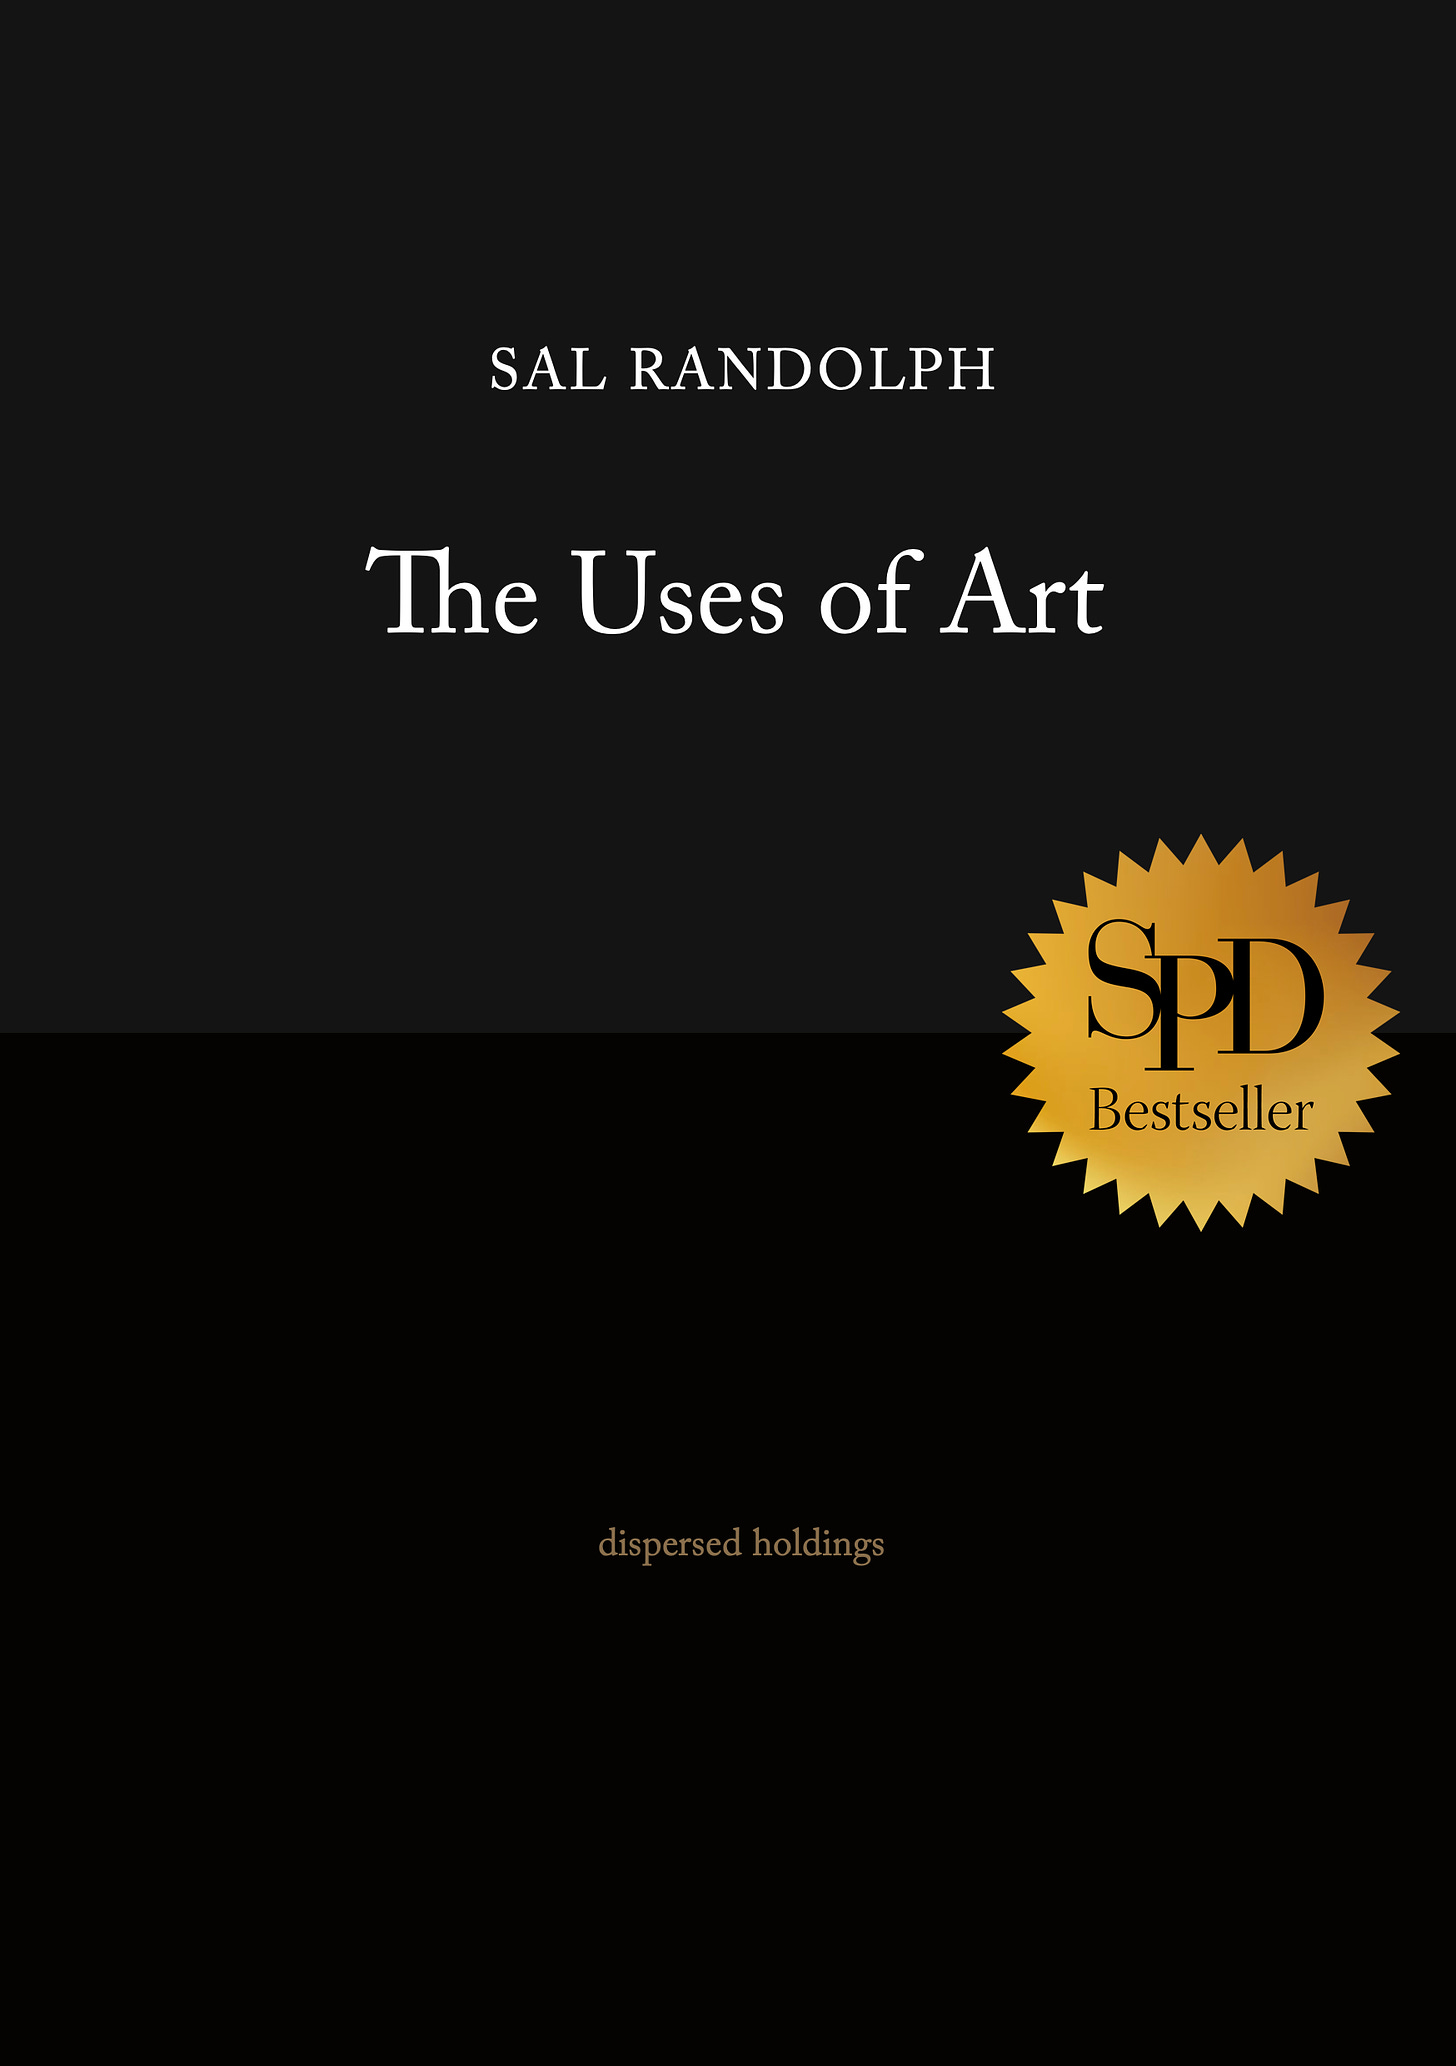 Front cover of The Uses of Art by Sal Randolph. The cover is black on black with white text, and there is a gold badge that says SPD Bestseller.